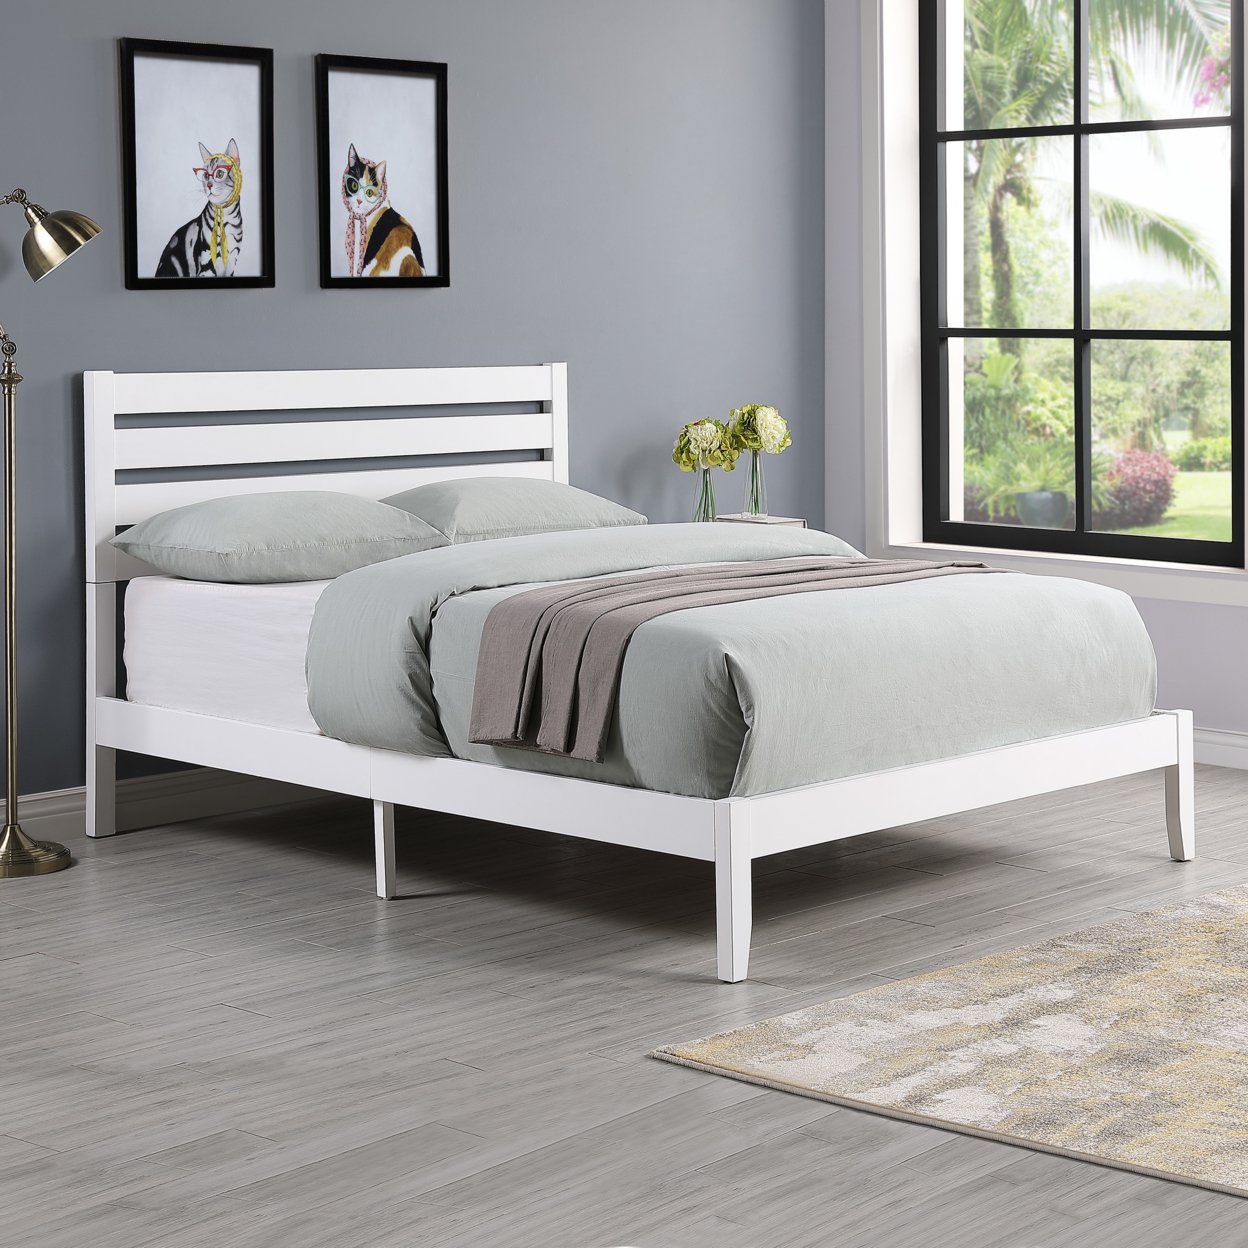 Kenley Queen Size Bed With Headboard - White Finish + Natural